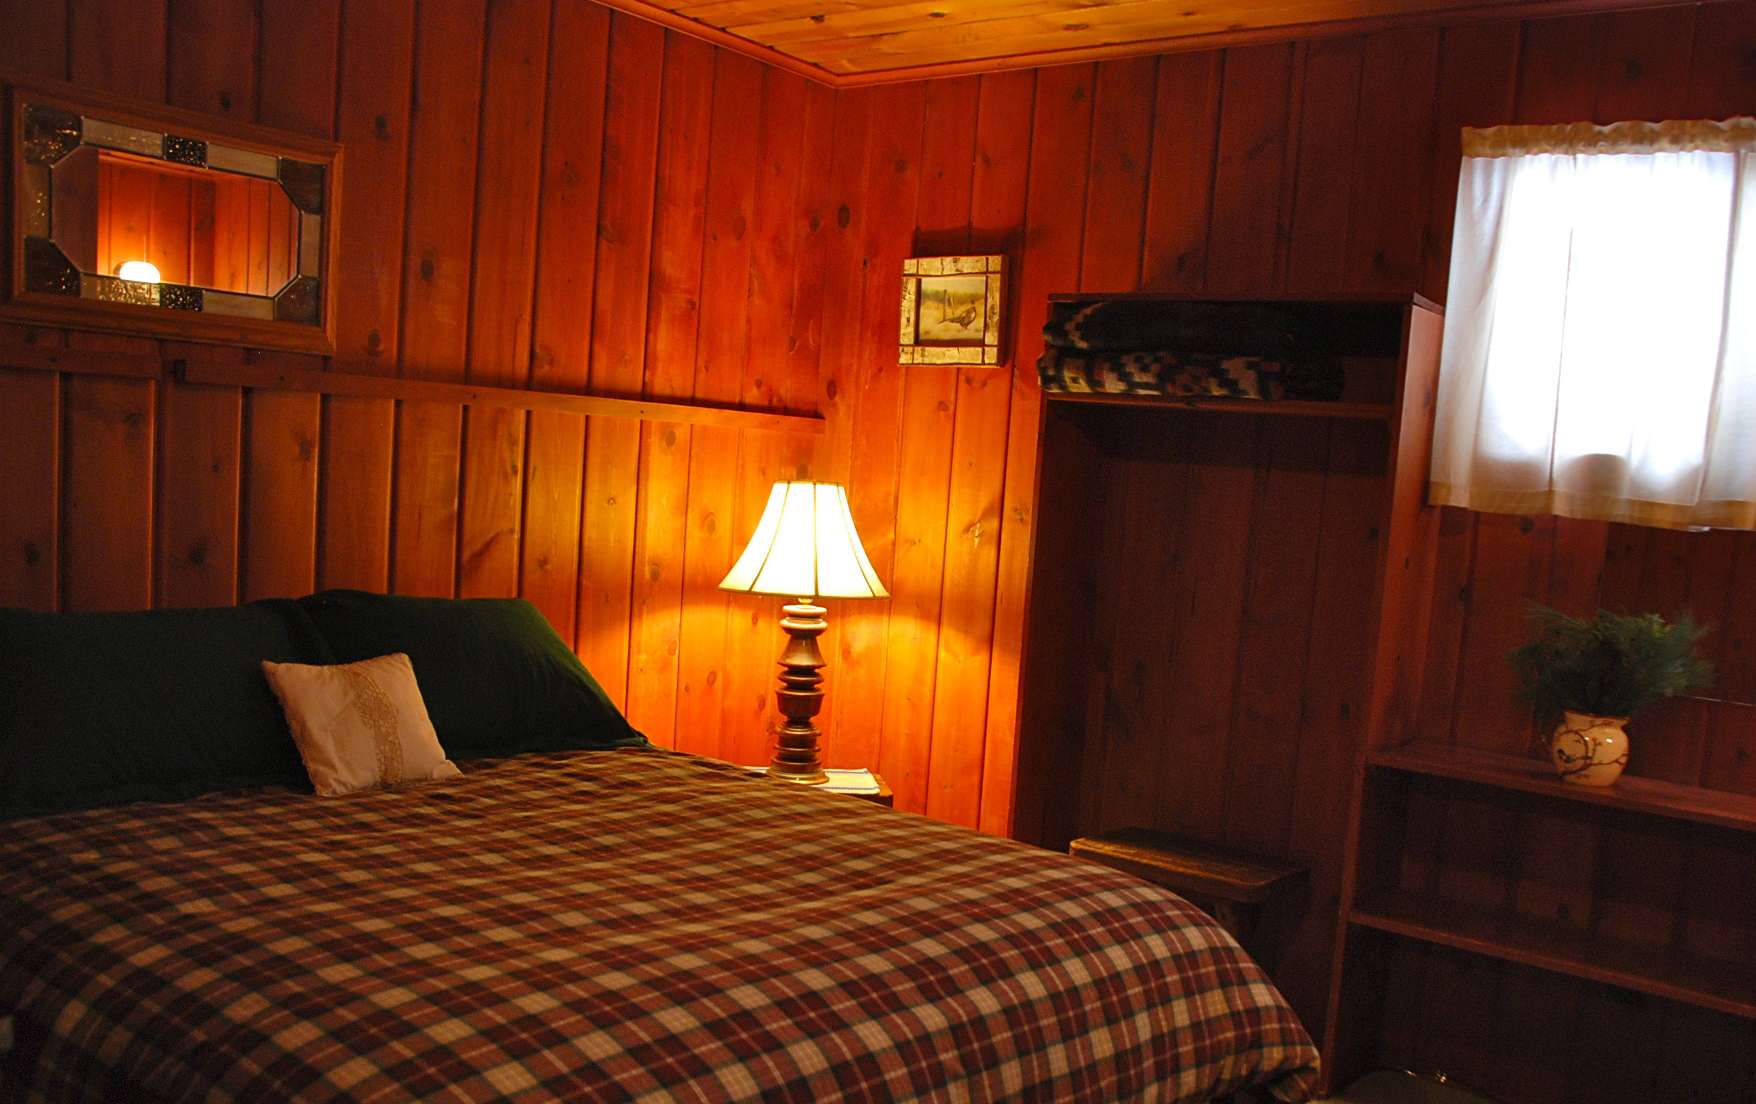 New queen size beds with cozy bedding have replaced bunk beds in some rooms at Elvyn Lea Lodge.